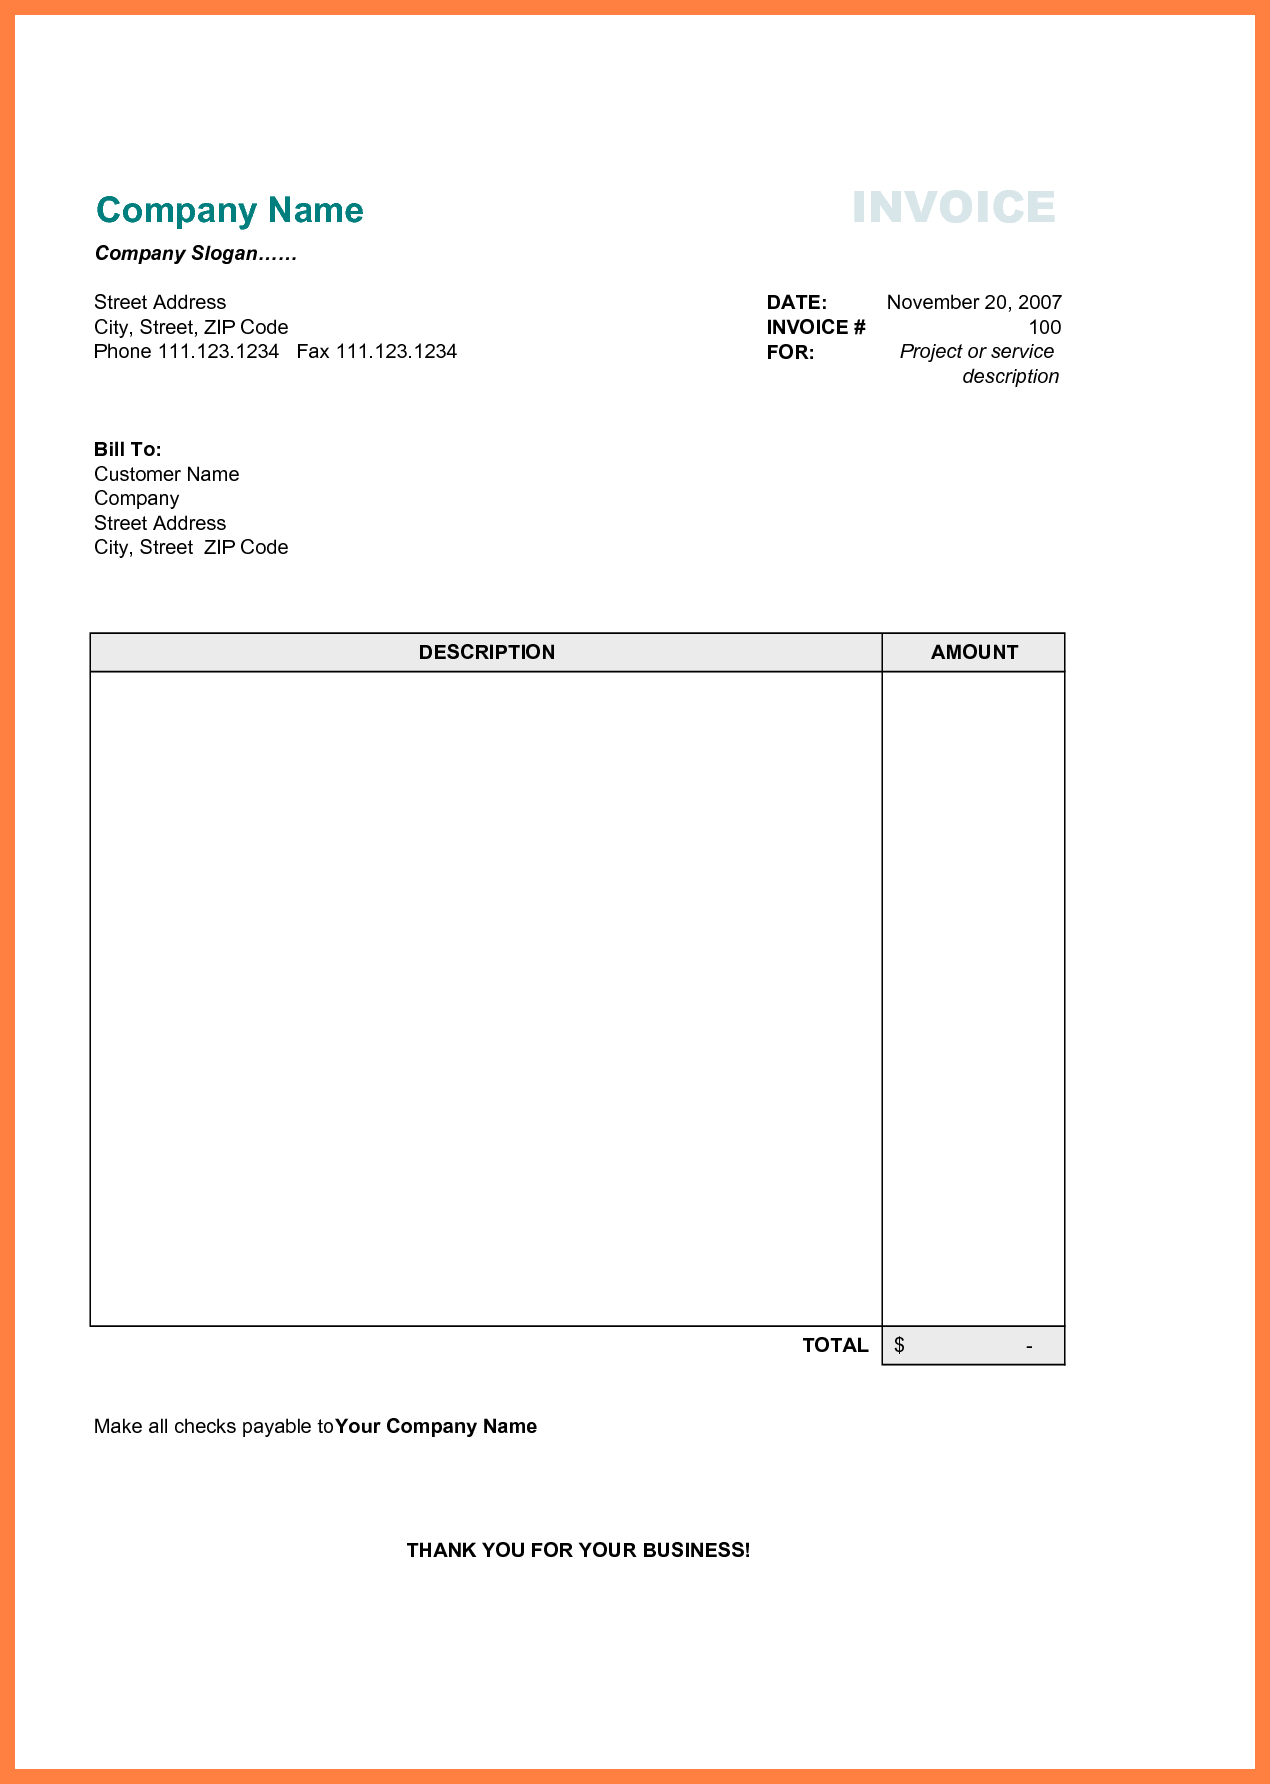 Free Printable Business Invoice Template - Invoice Format In Excel - Free Printable Business Documents